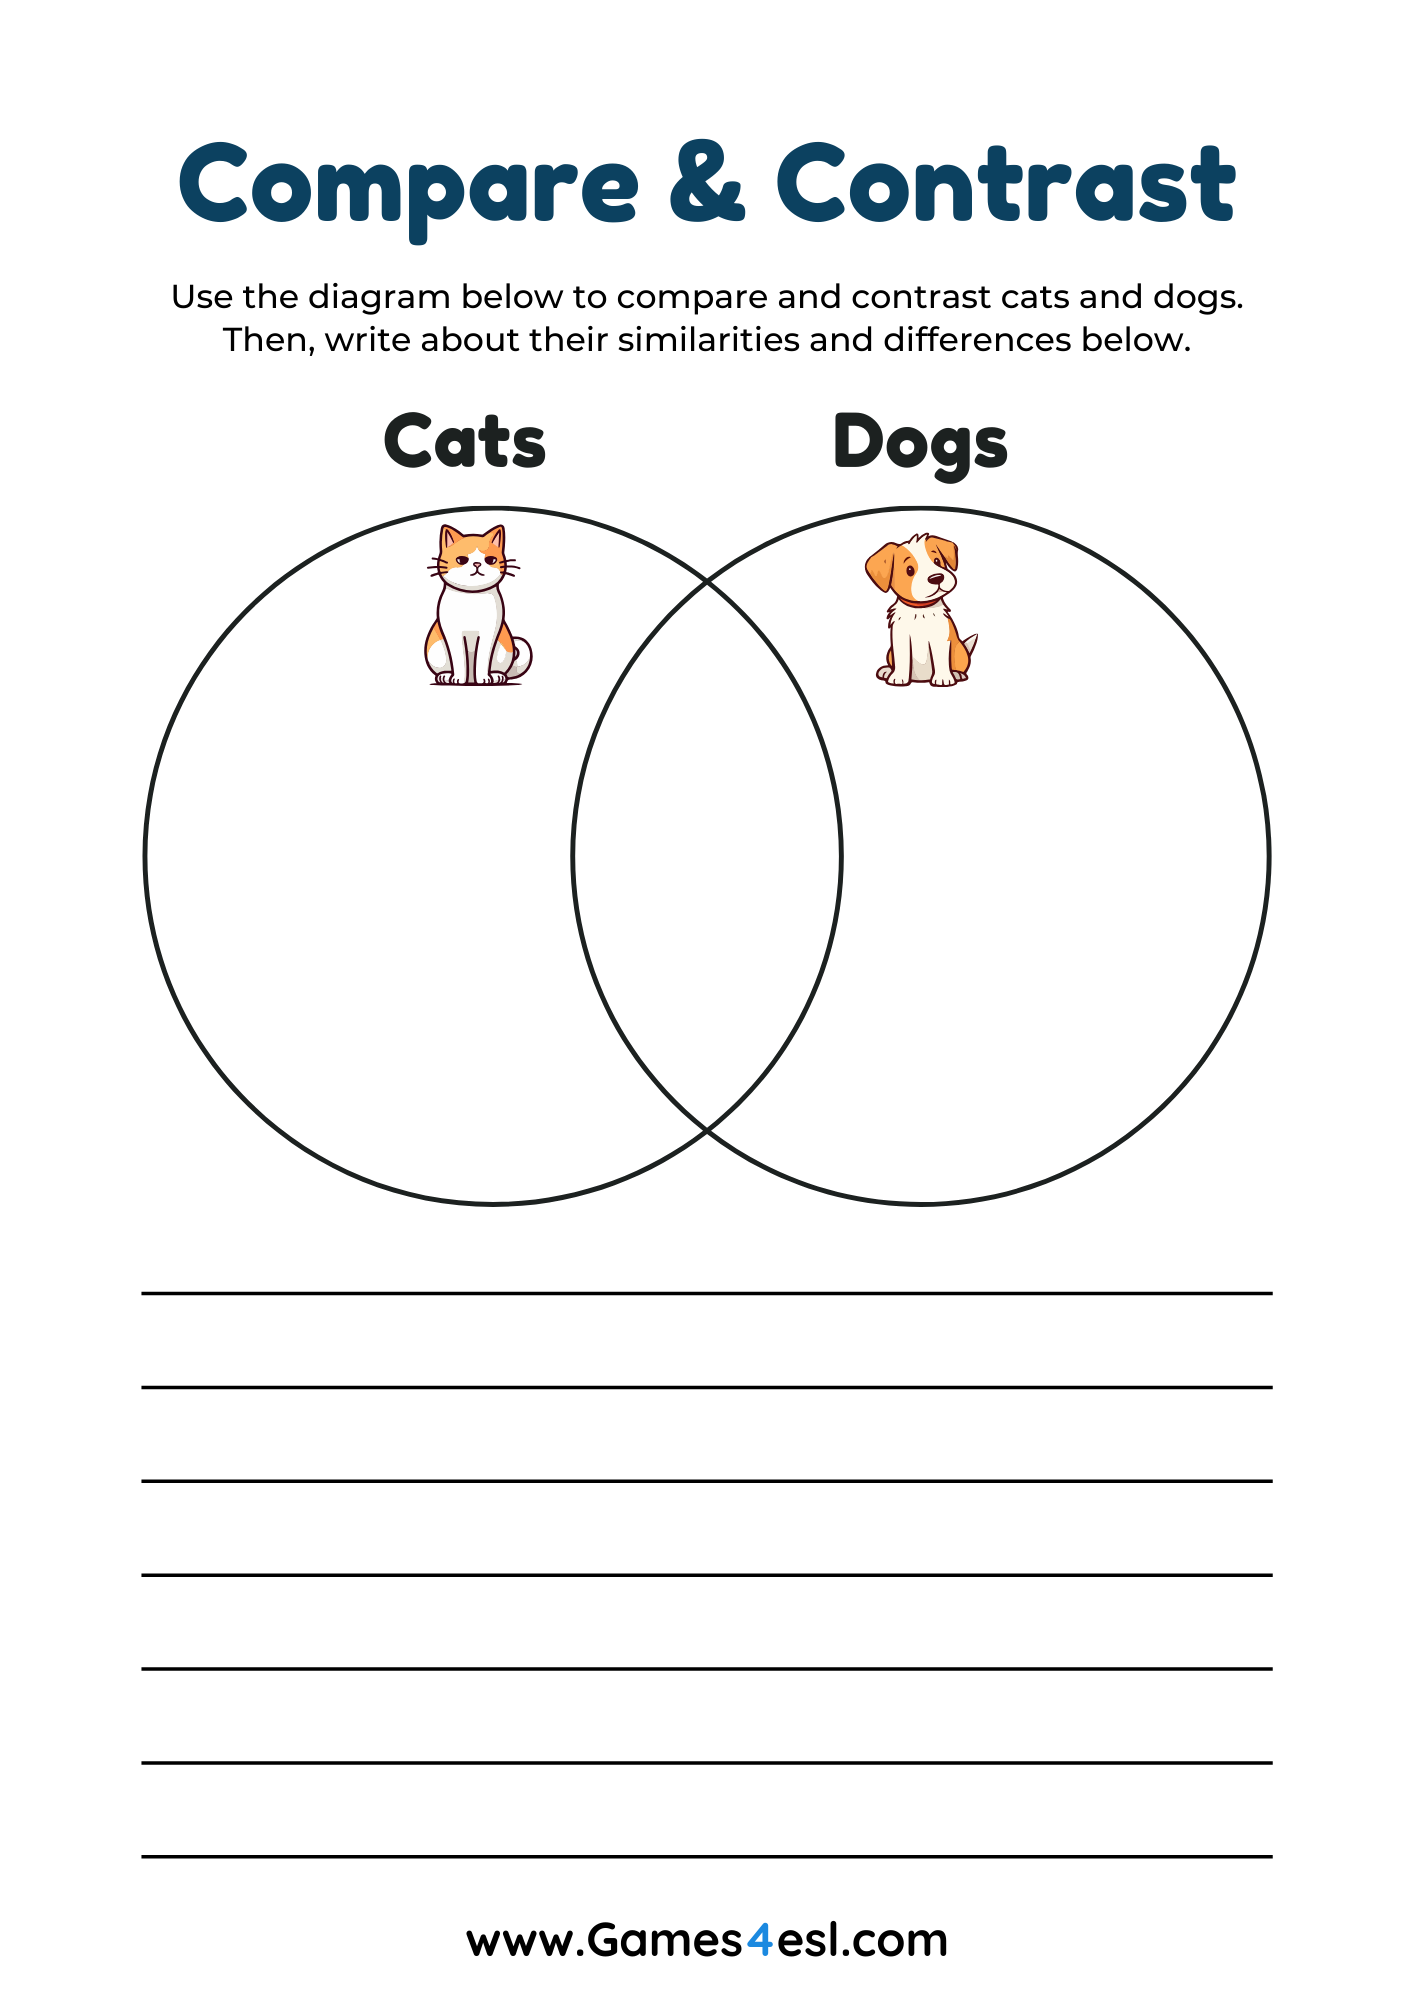 A Compare and Contrast worksheet with a Venn diagram that asks students to compare and contrast cats and dogs.